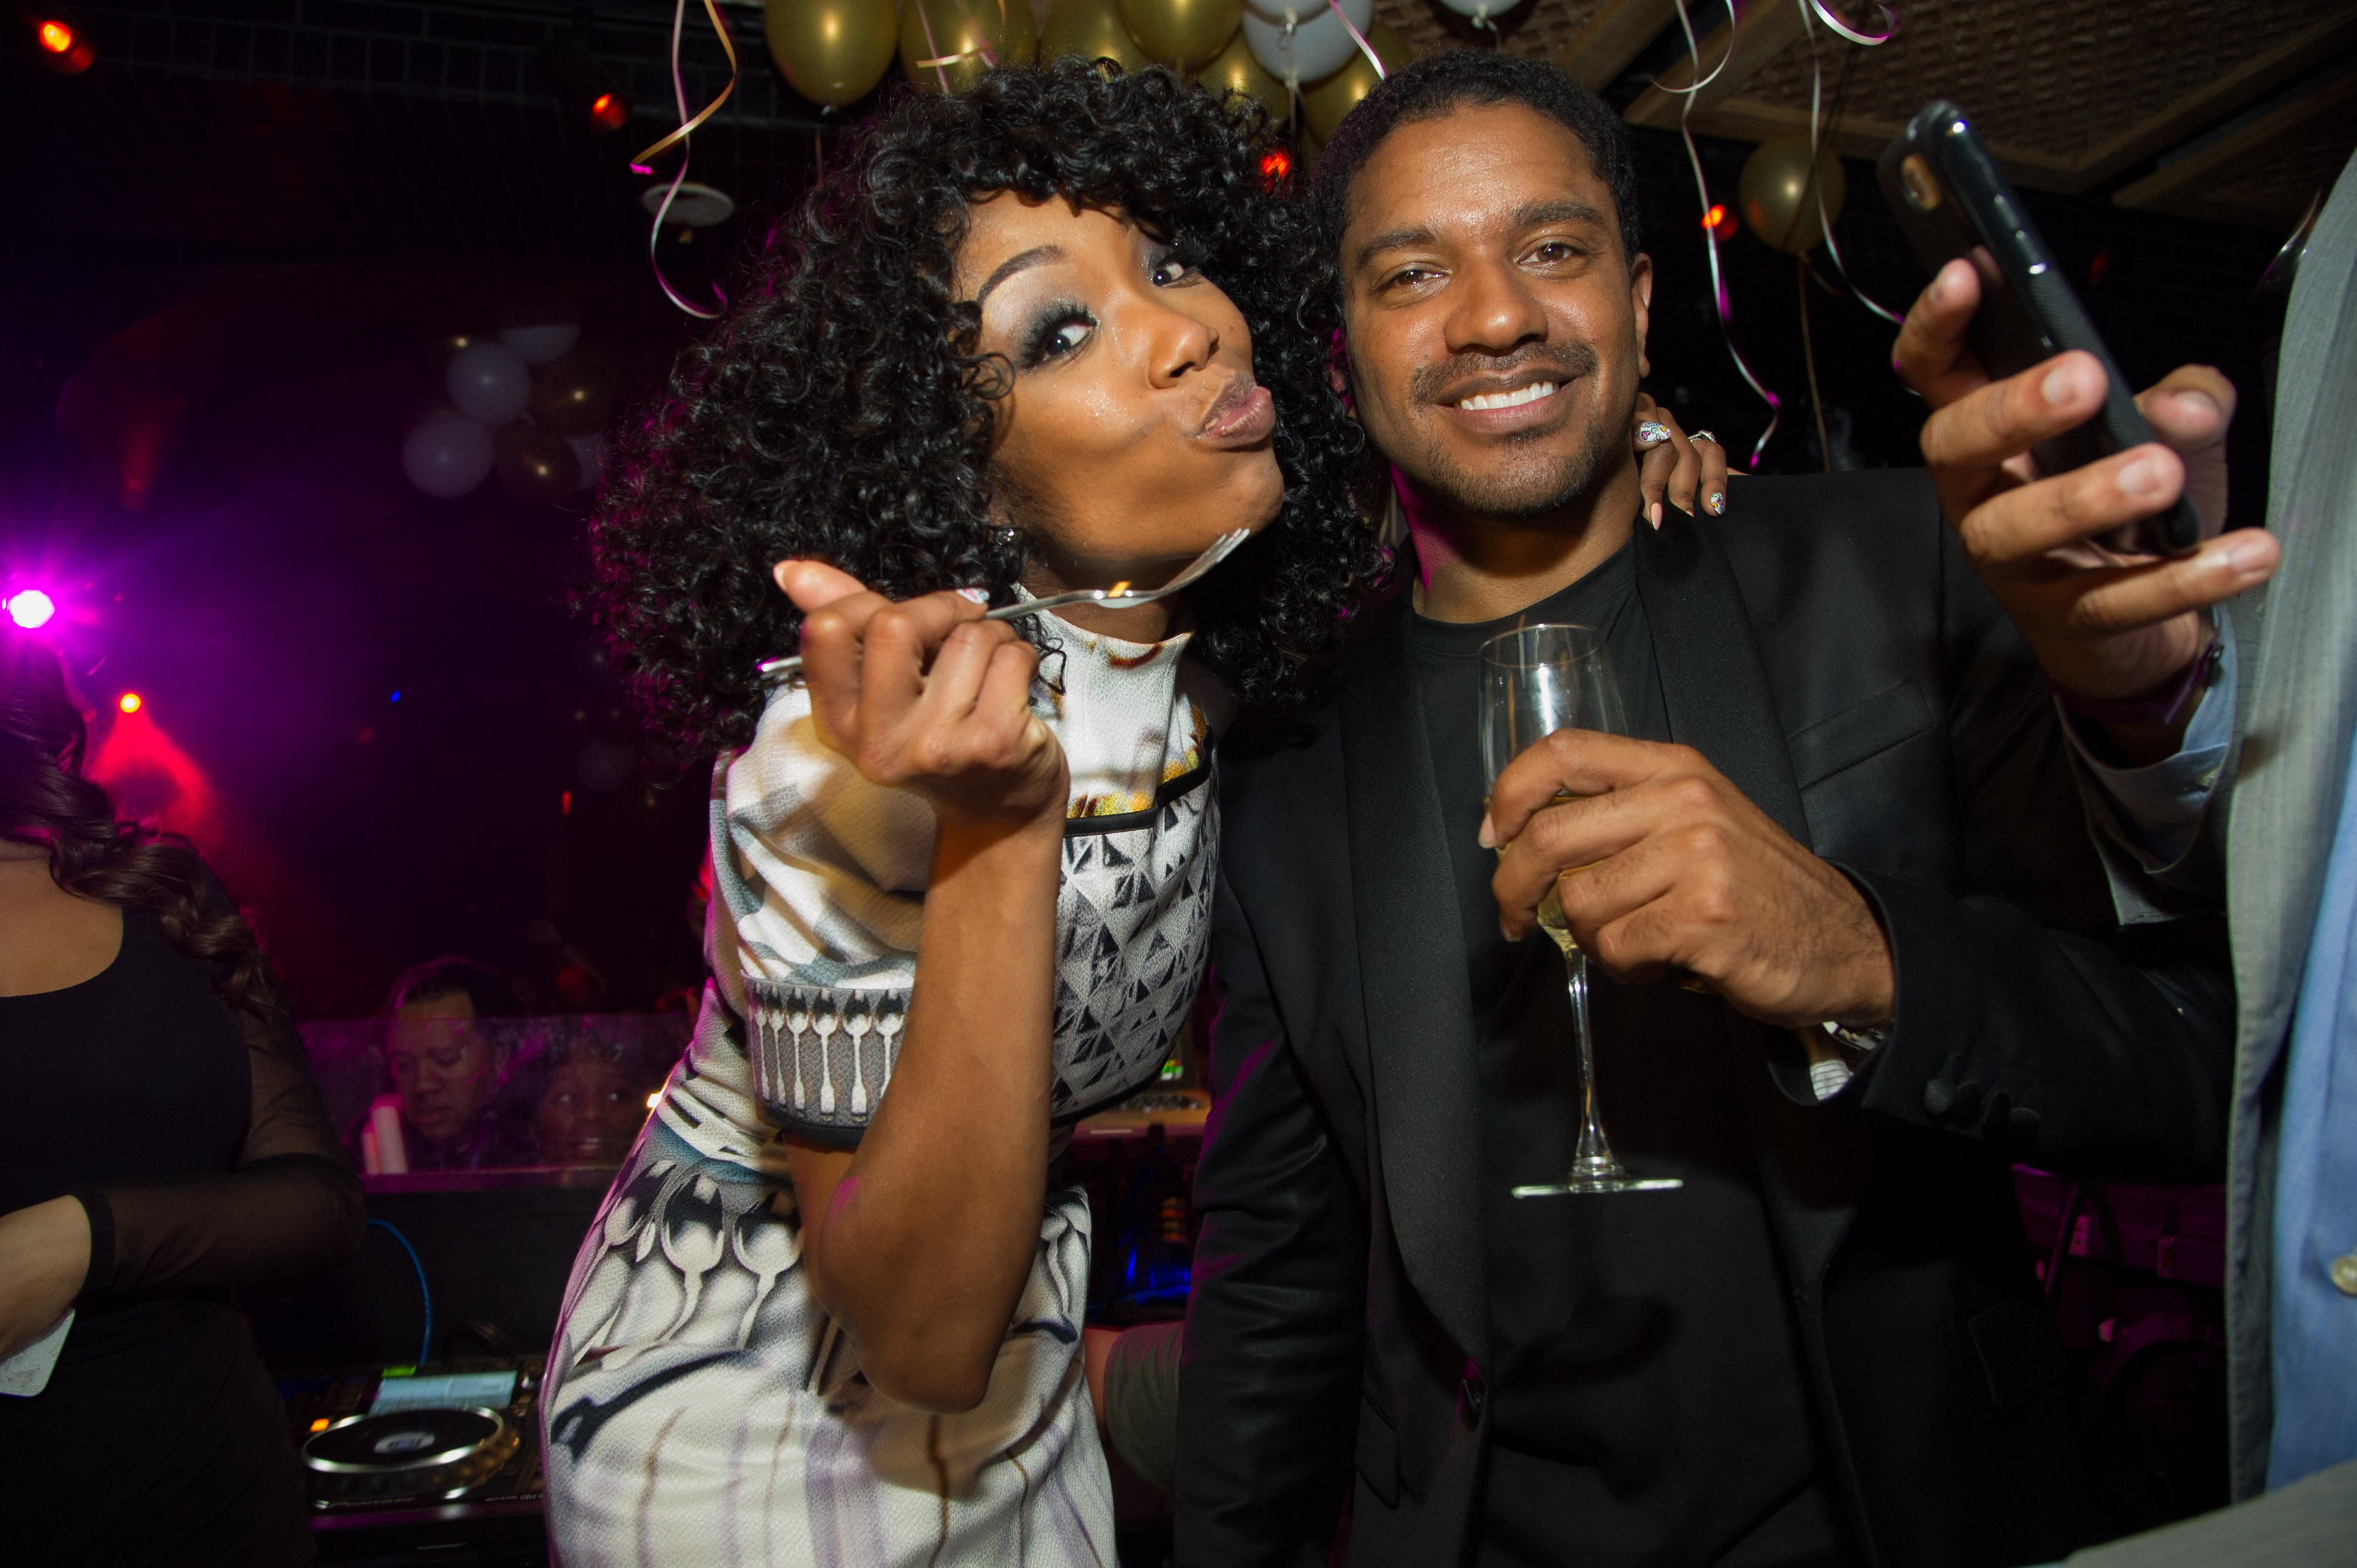 R&B singer, Brandy performs at Lavo Nightclub on New Years Eve with her fiance, Ryan Press in attendance on Monday, Dec. 31, 2012, in Las Vegas. (Photo by Al Powers/Powers Imagery/Invision/AP)